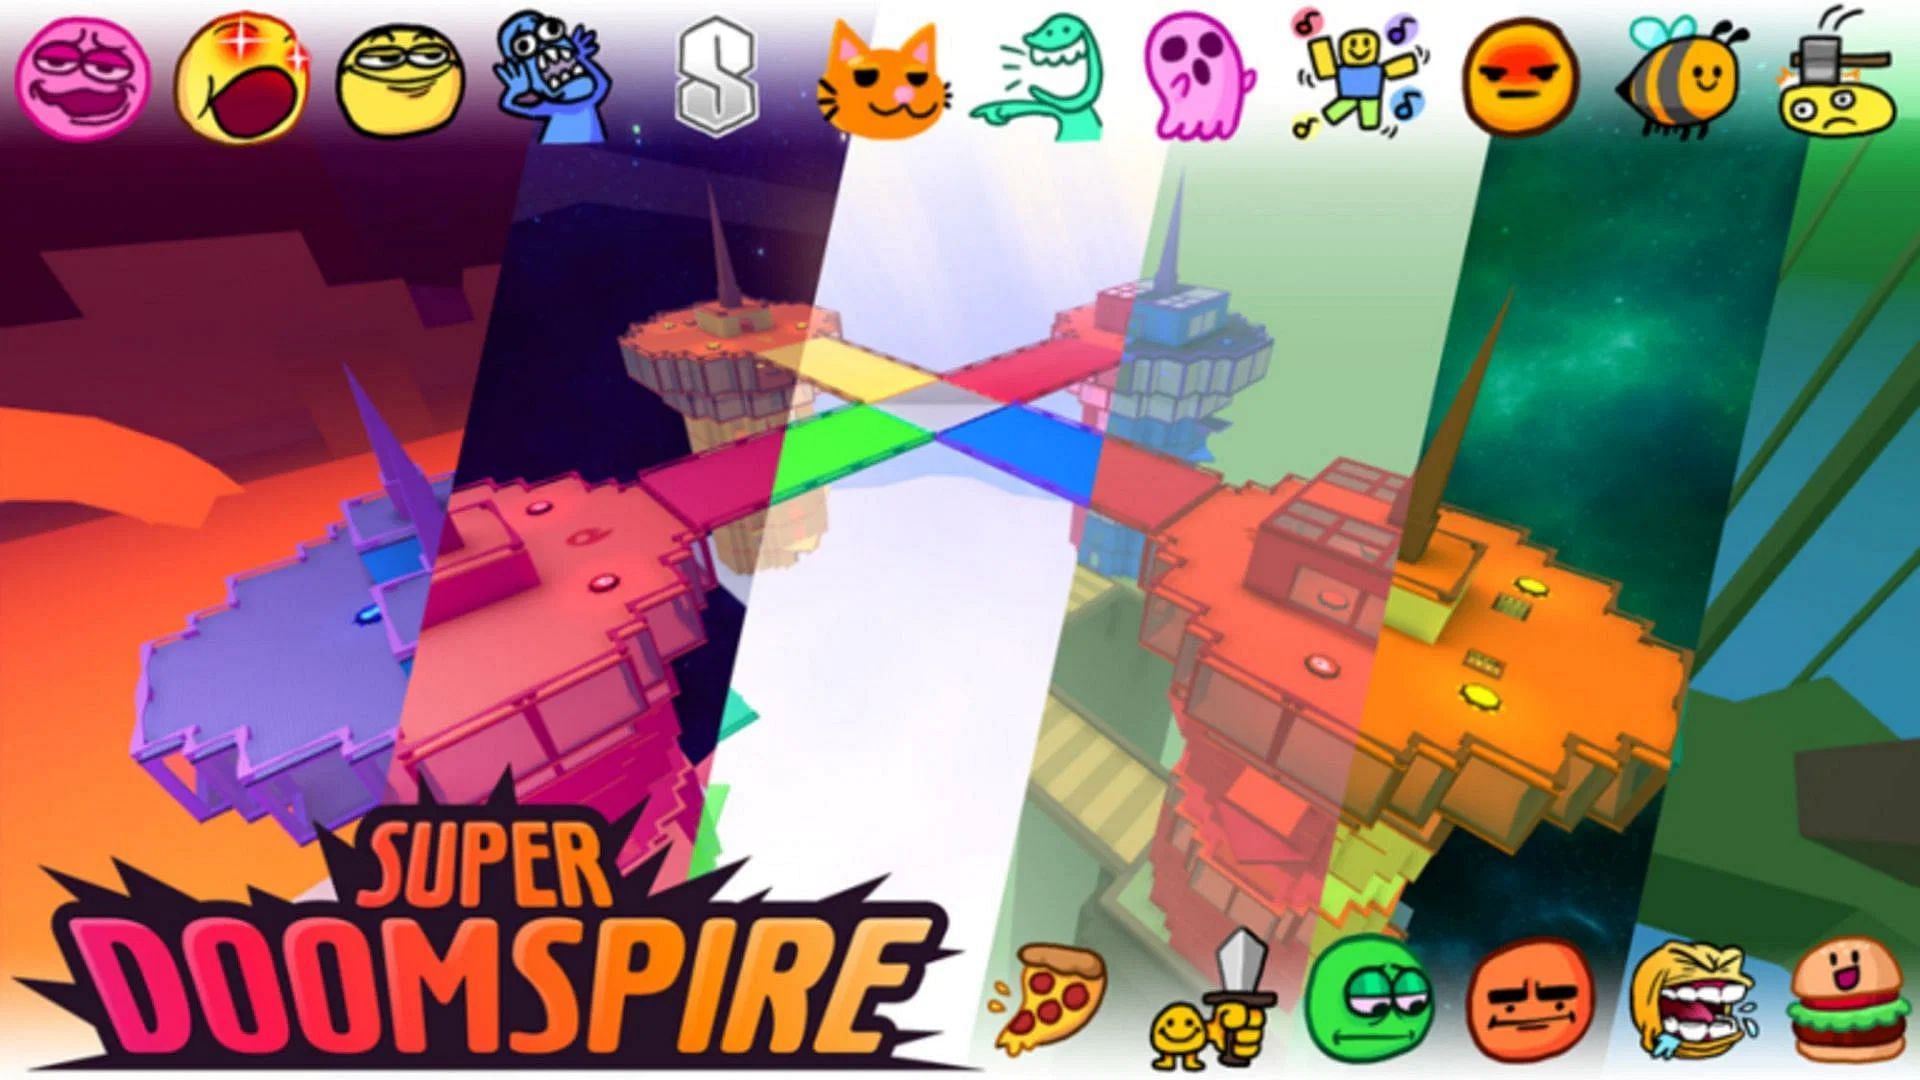 Roblox Super Doomspire codes Free crowns and stickers (July 2022)